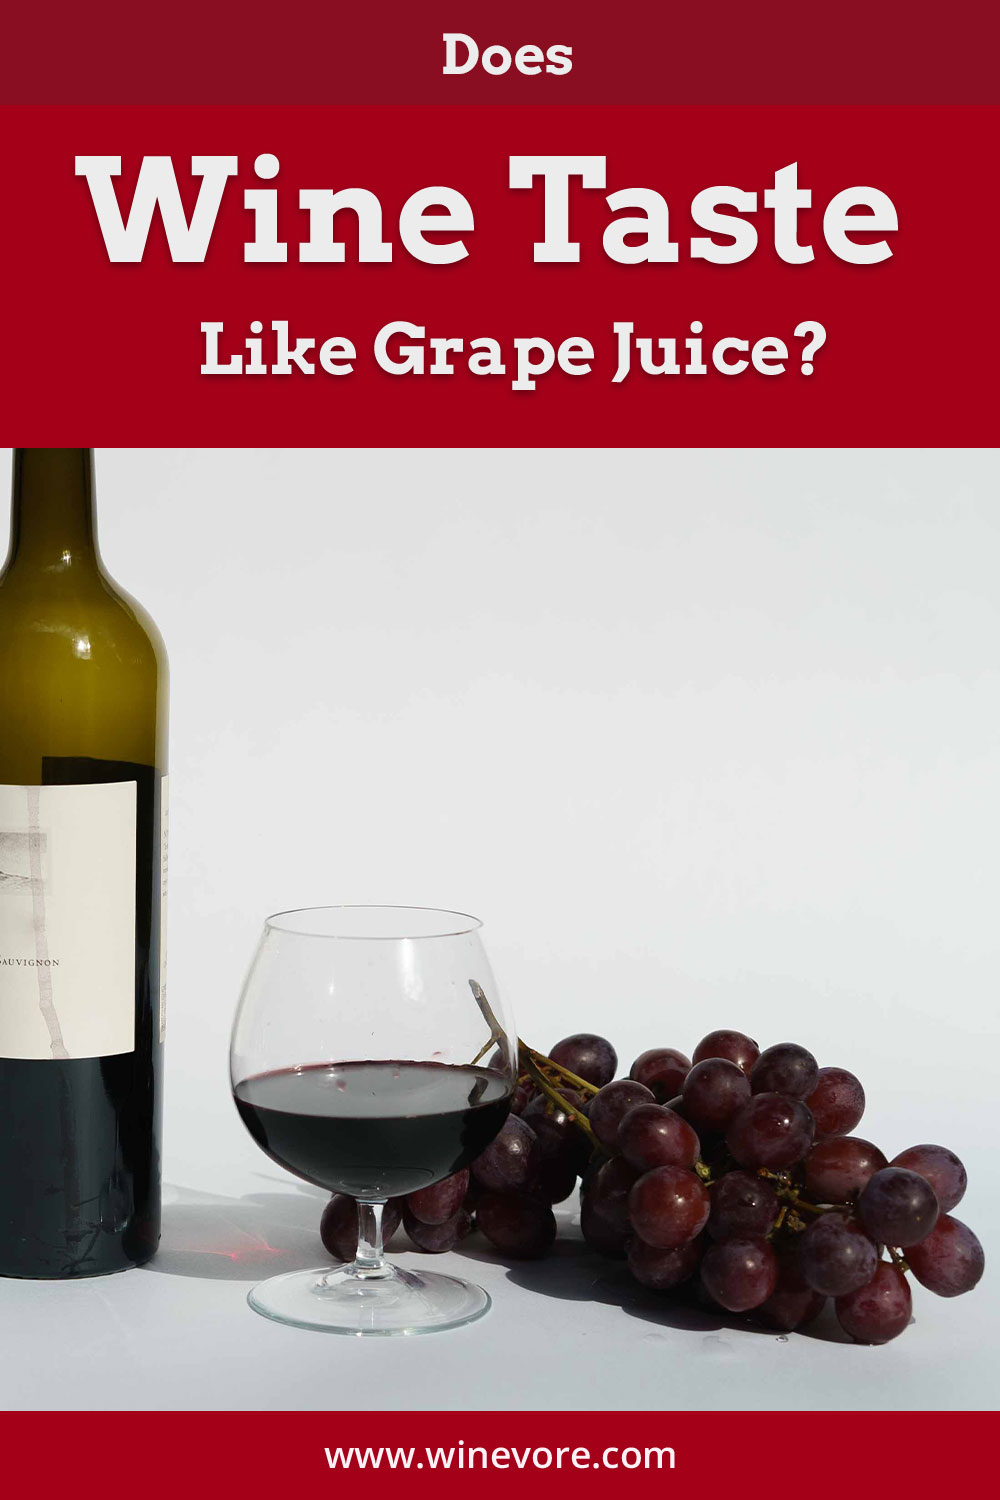 Wine bottle and glass on a white surface with grapes nearby - Does Wine Taste Like Grape Juice?